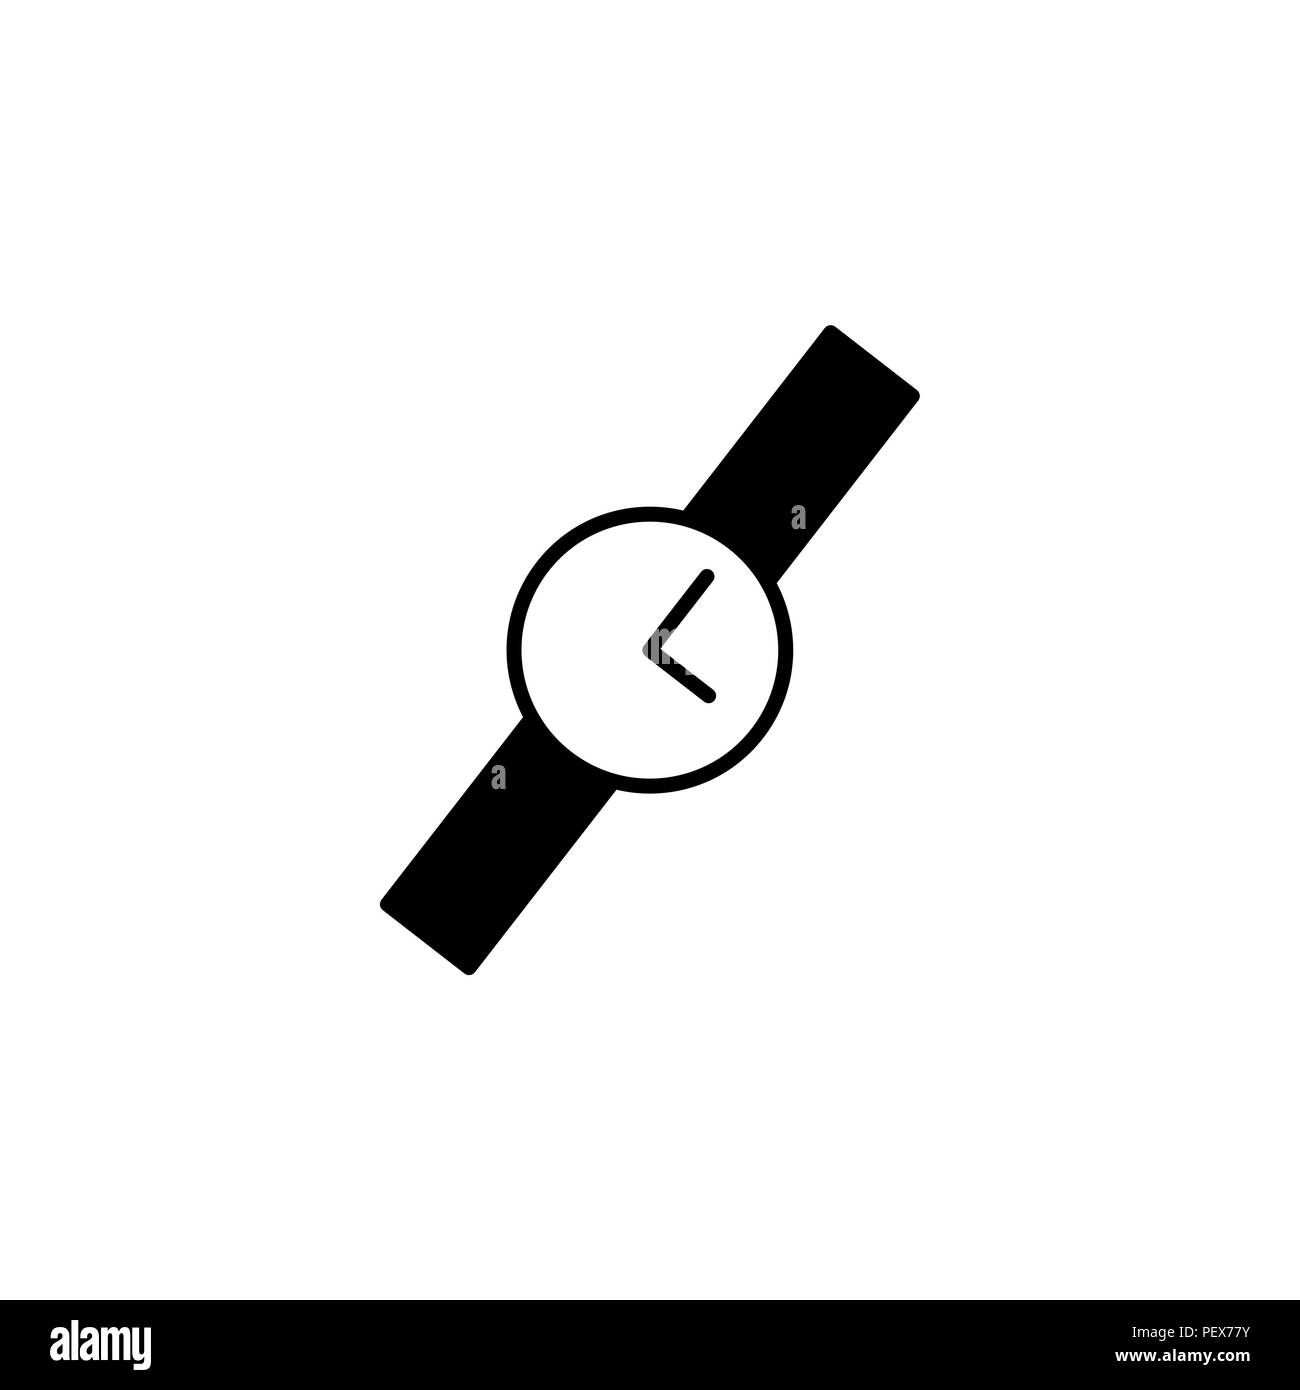 Wristwatch vector icon black on white background Stock Vector